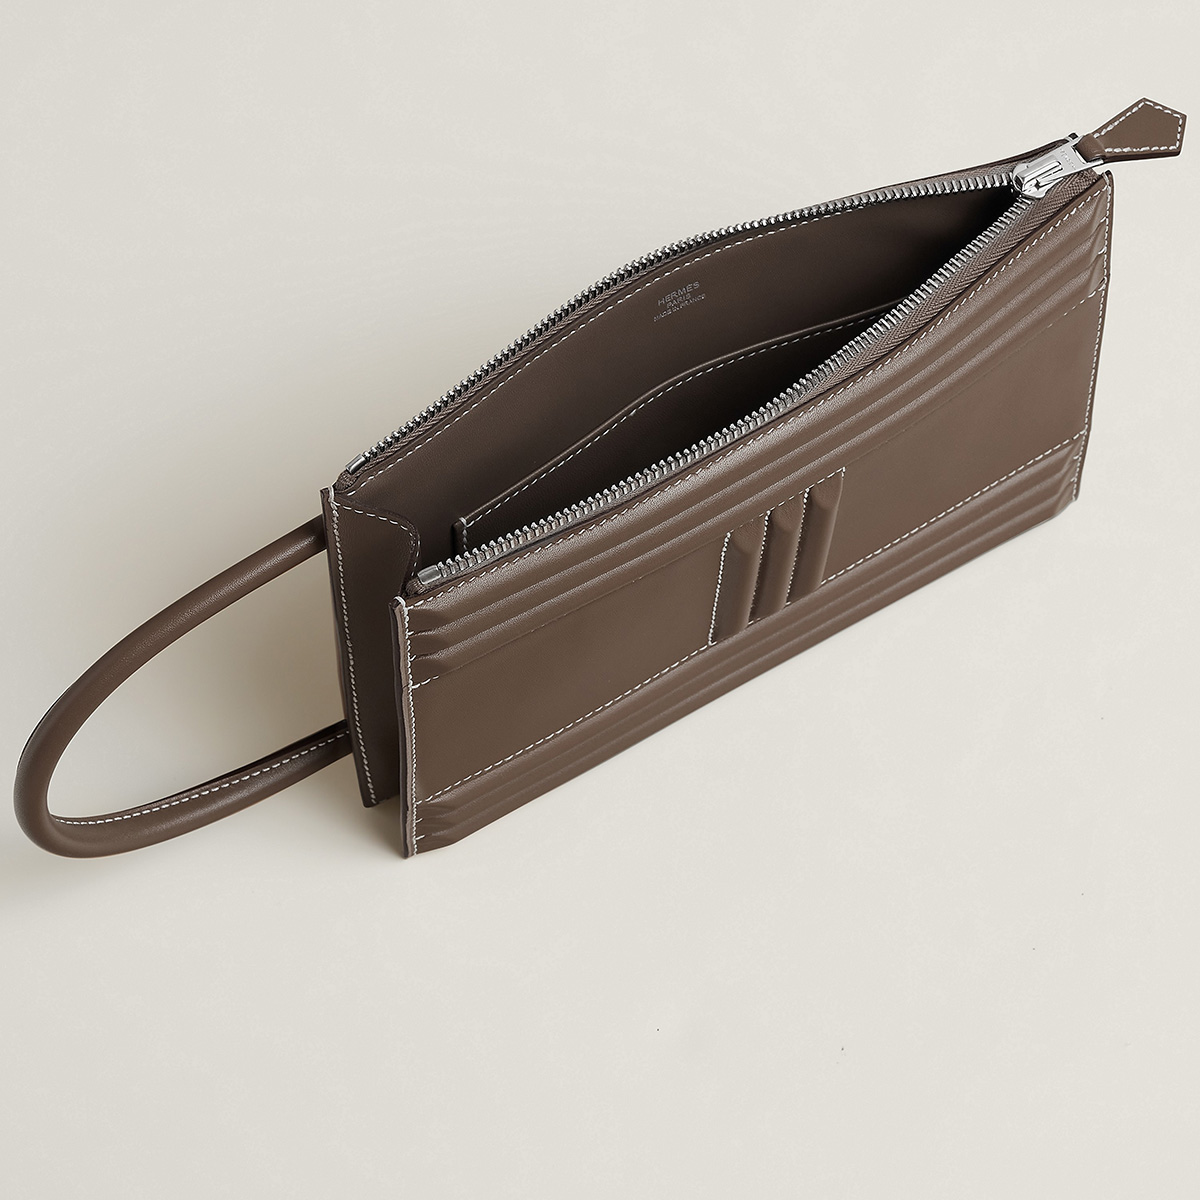 The interior of the Cadenas Clutch features a slide pocket along the rear panel and a zipper along the long side of the bag. Photo via Hermes.com.